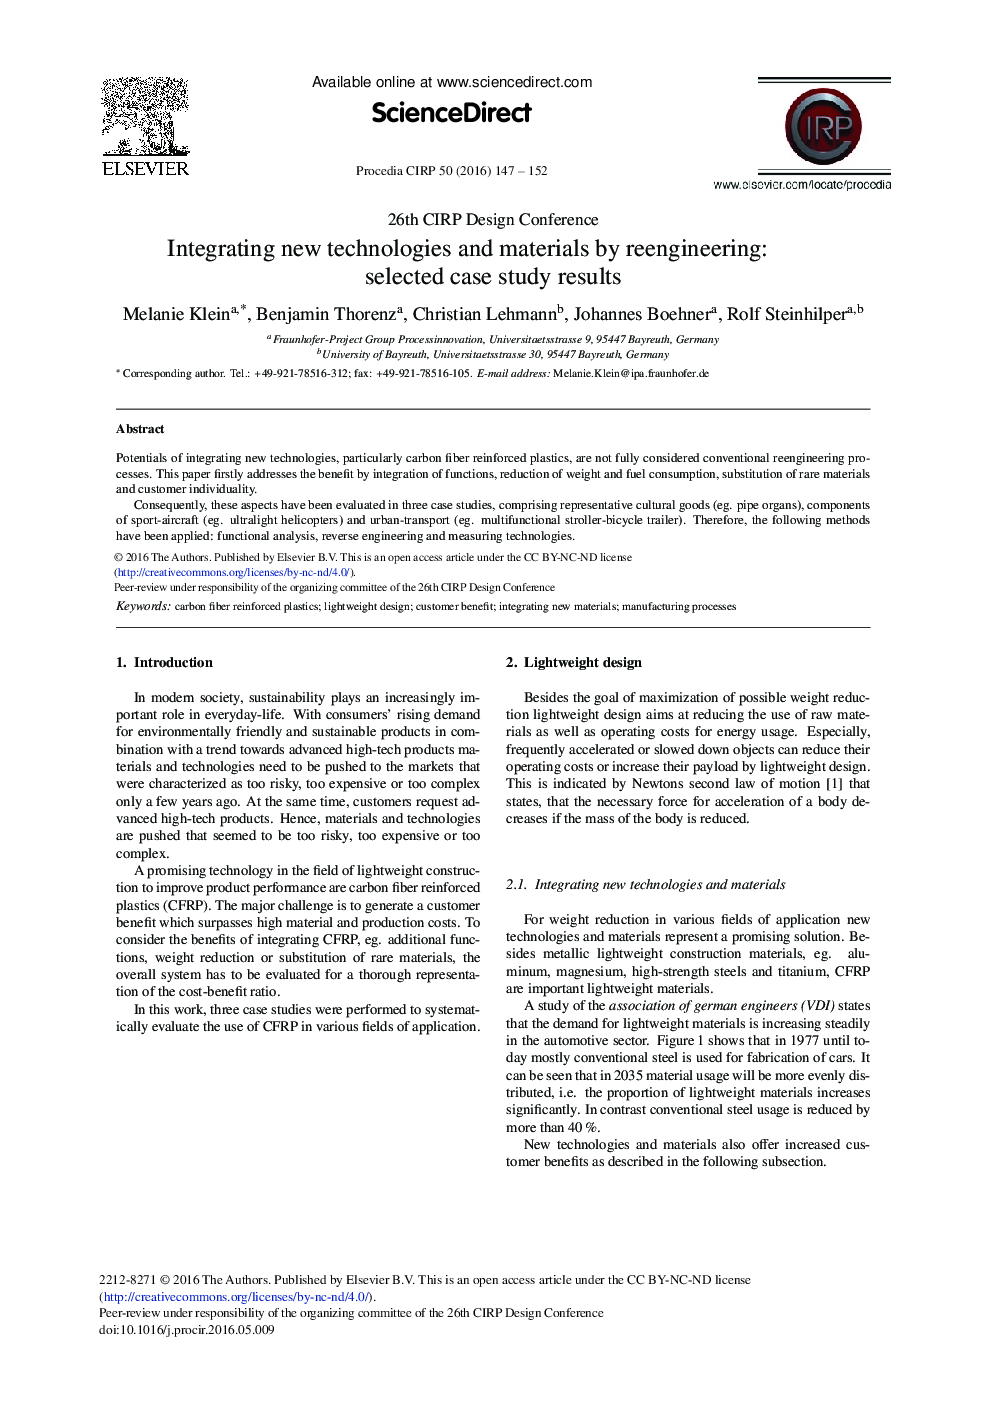 Integrating New Technologies and Materials by Reengineering: Selected Case Study Results 